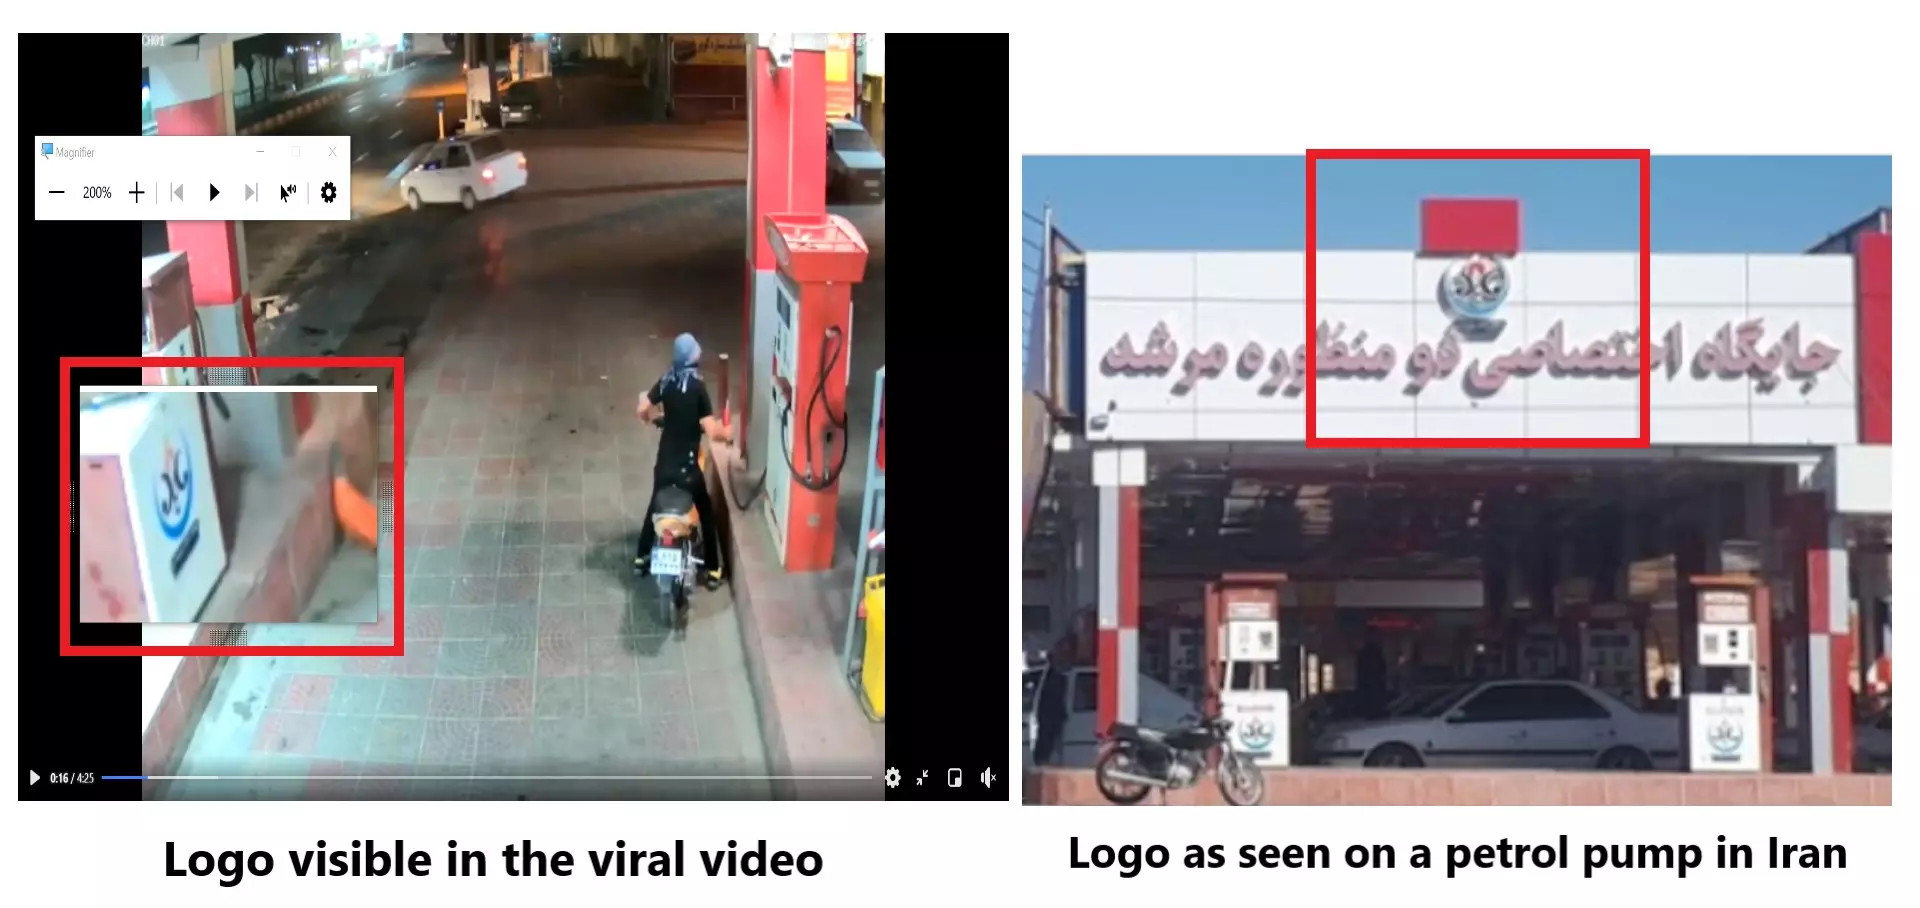 The logo visible in the viral video (left) matches the one seen on a petrol pump in Rafsanjan, Iran.